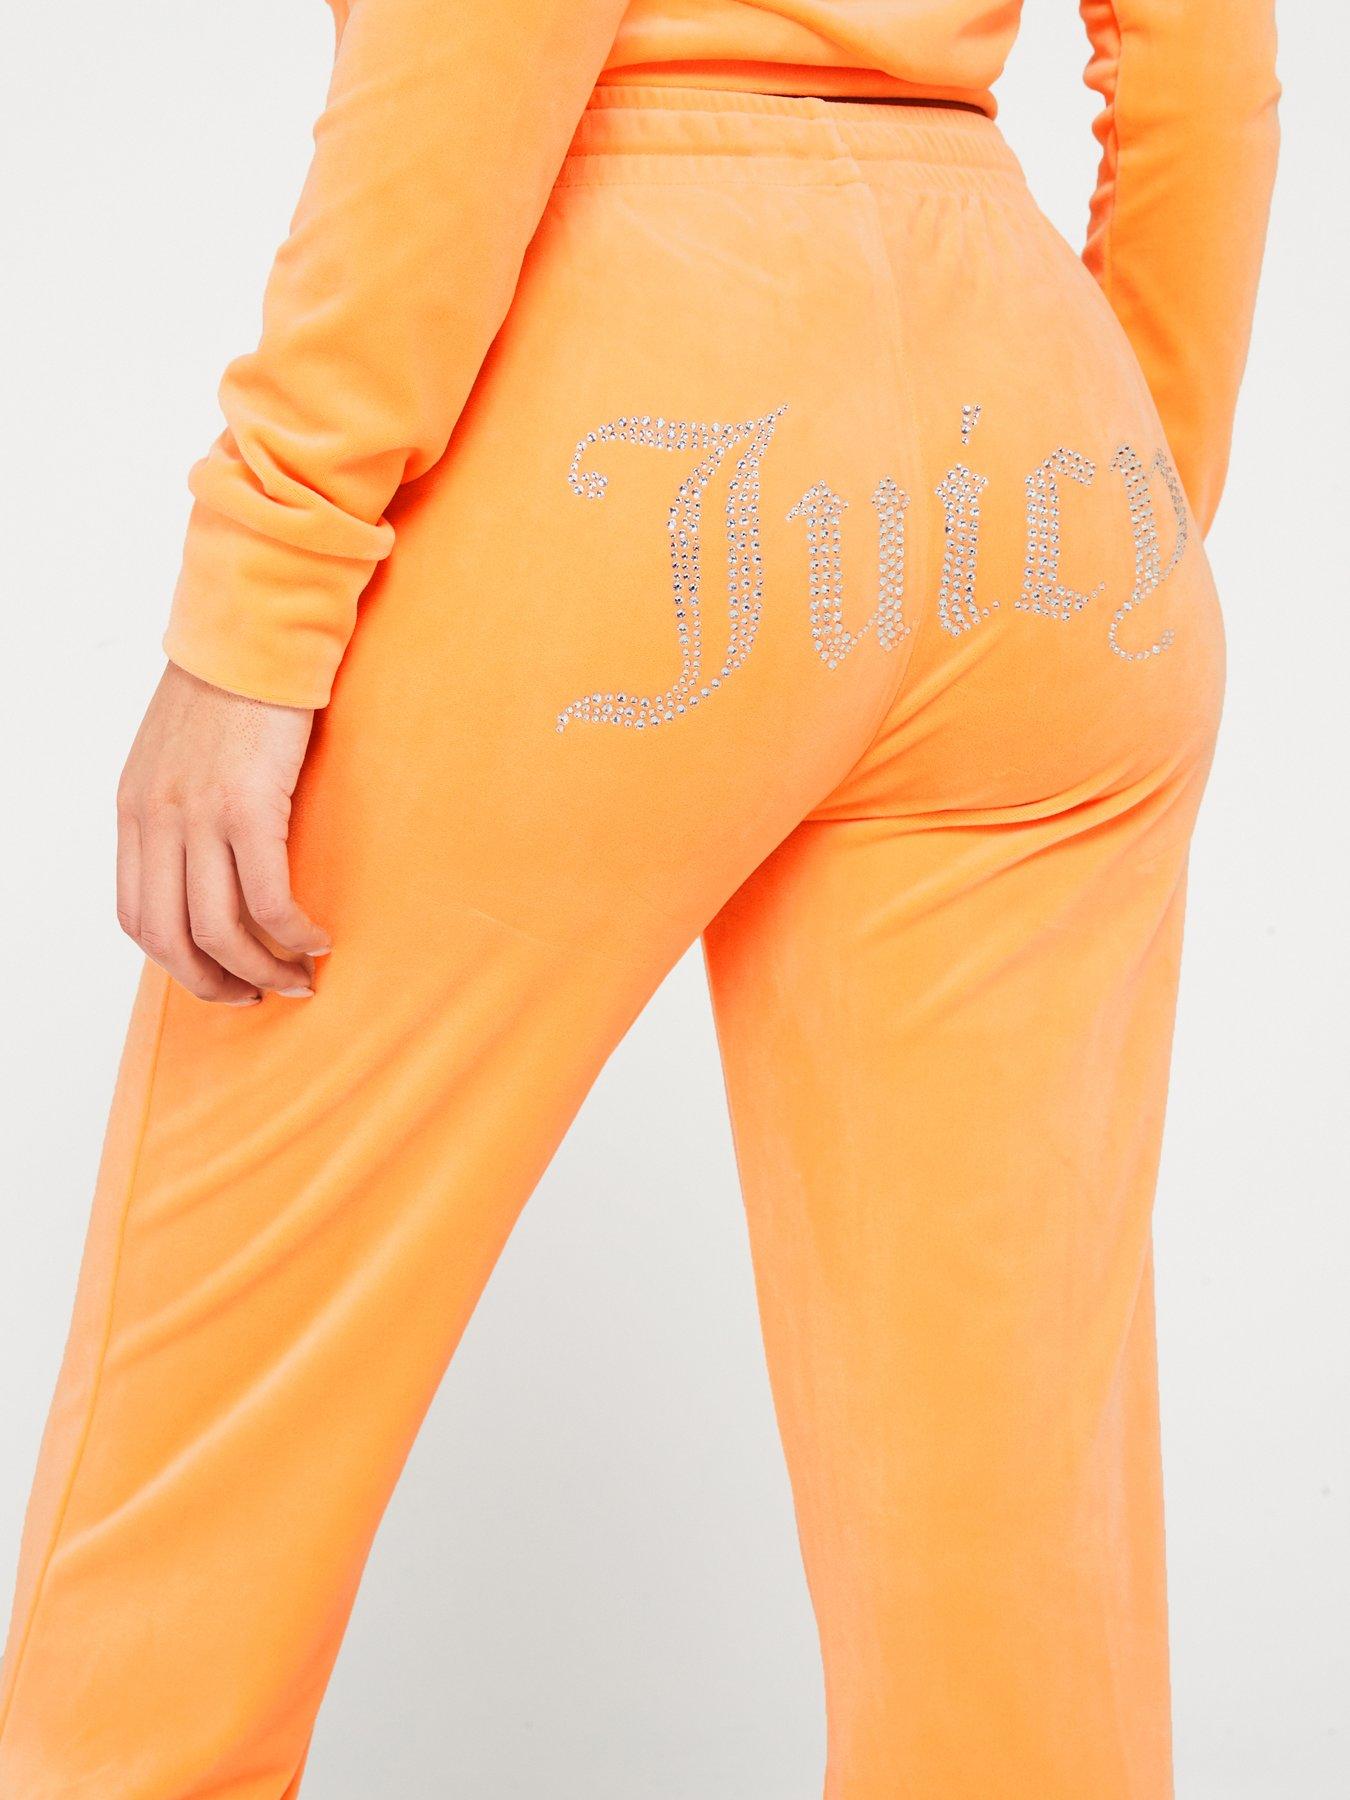 Juicy Couture Sport Leggings SIZE XXL - $20 - From My